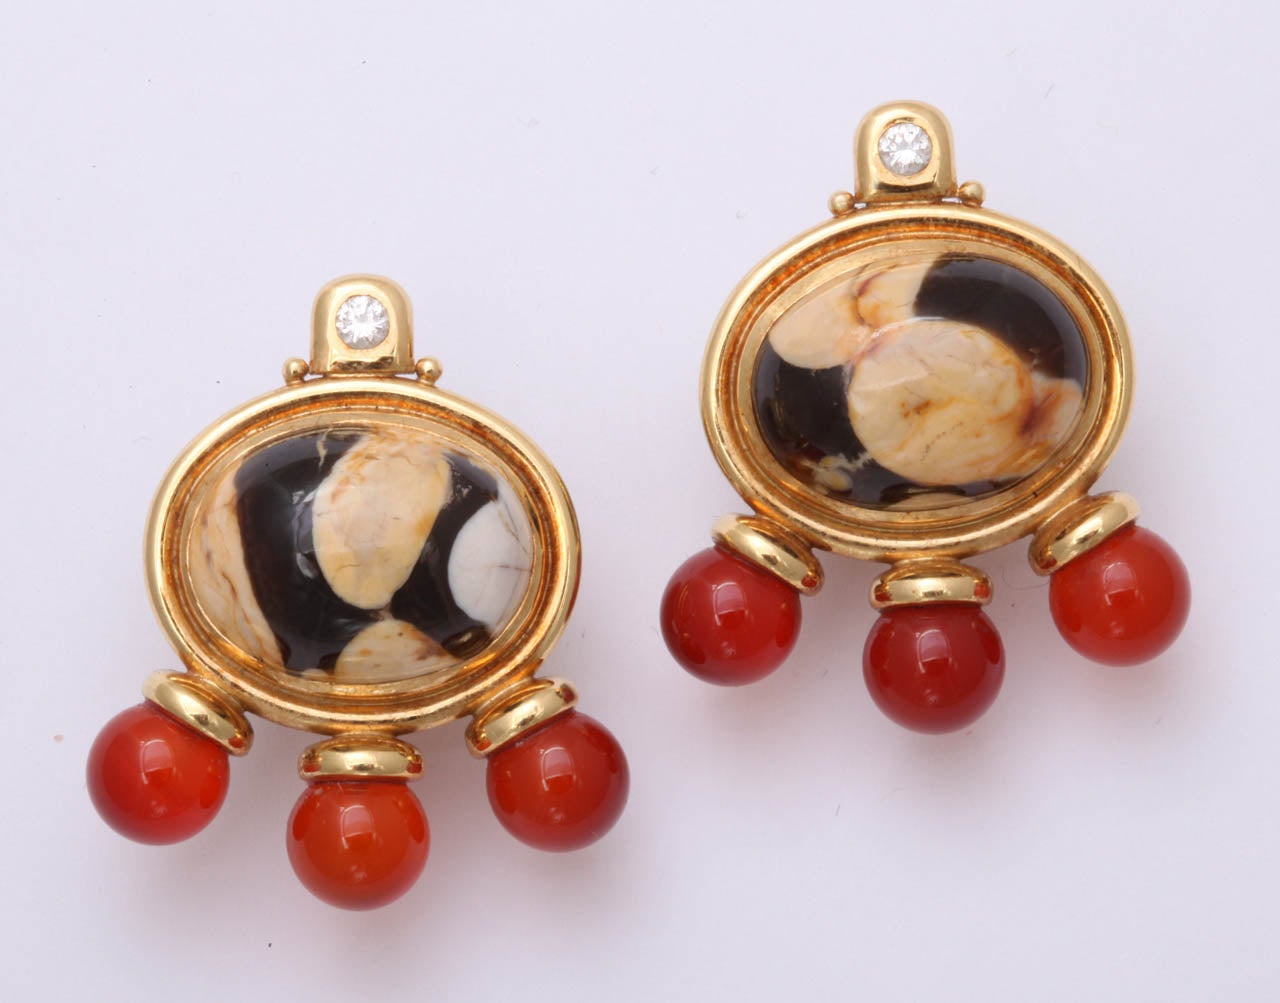 Striking Medieval style Earrings by Elizabeth Gage.  Oval Fossilized cabochon stones circled in 18kt Yellow Gold & crowned by a full cut Diamond & offset by 3 round Carnelian beads. Simply - pure power.